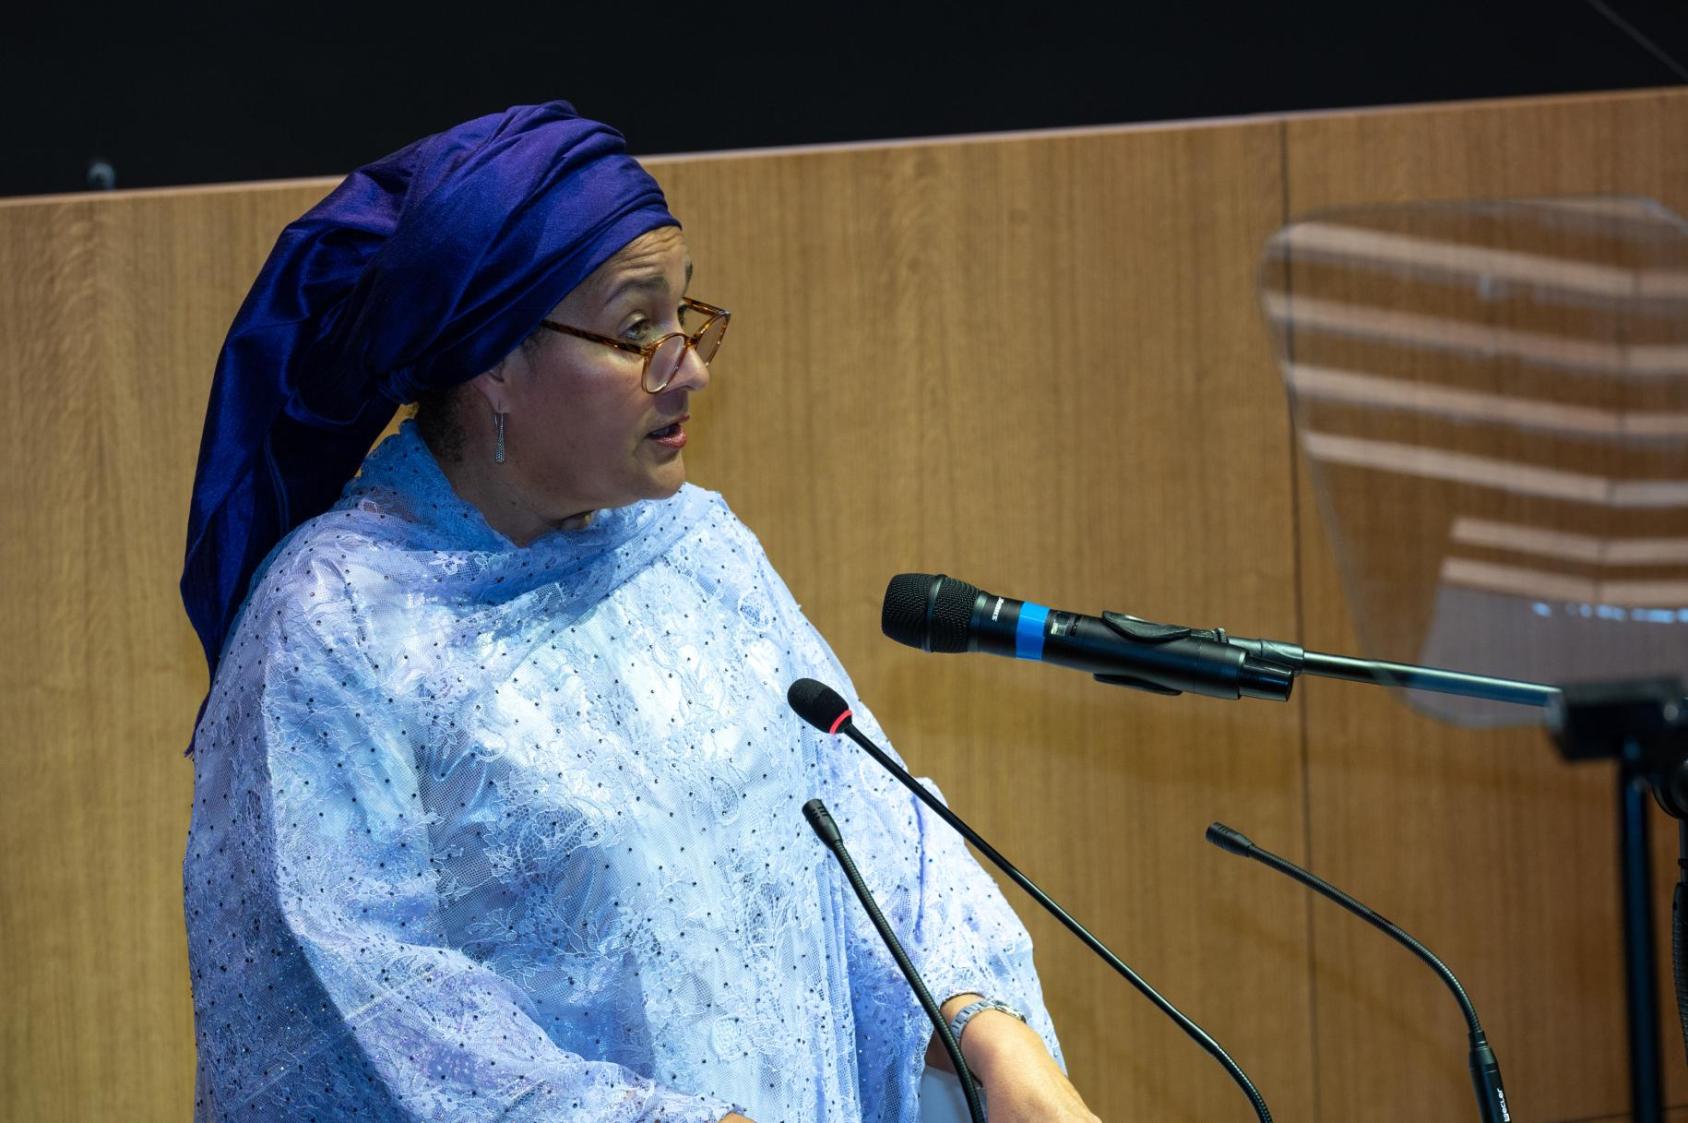 A woman in a light blue dress and dark blue hair turban, the UN Deputy Chief Amina Mohammed, speaks into a microphone at the UN House in Senegal